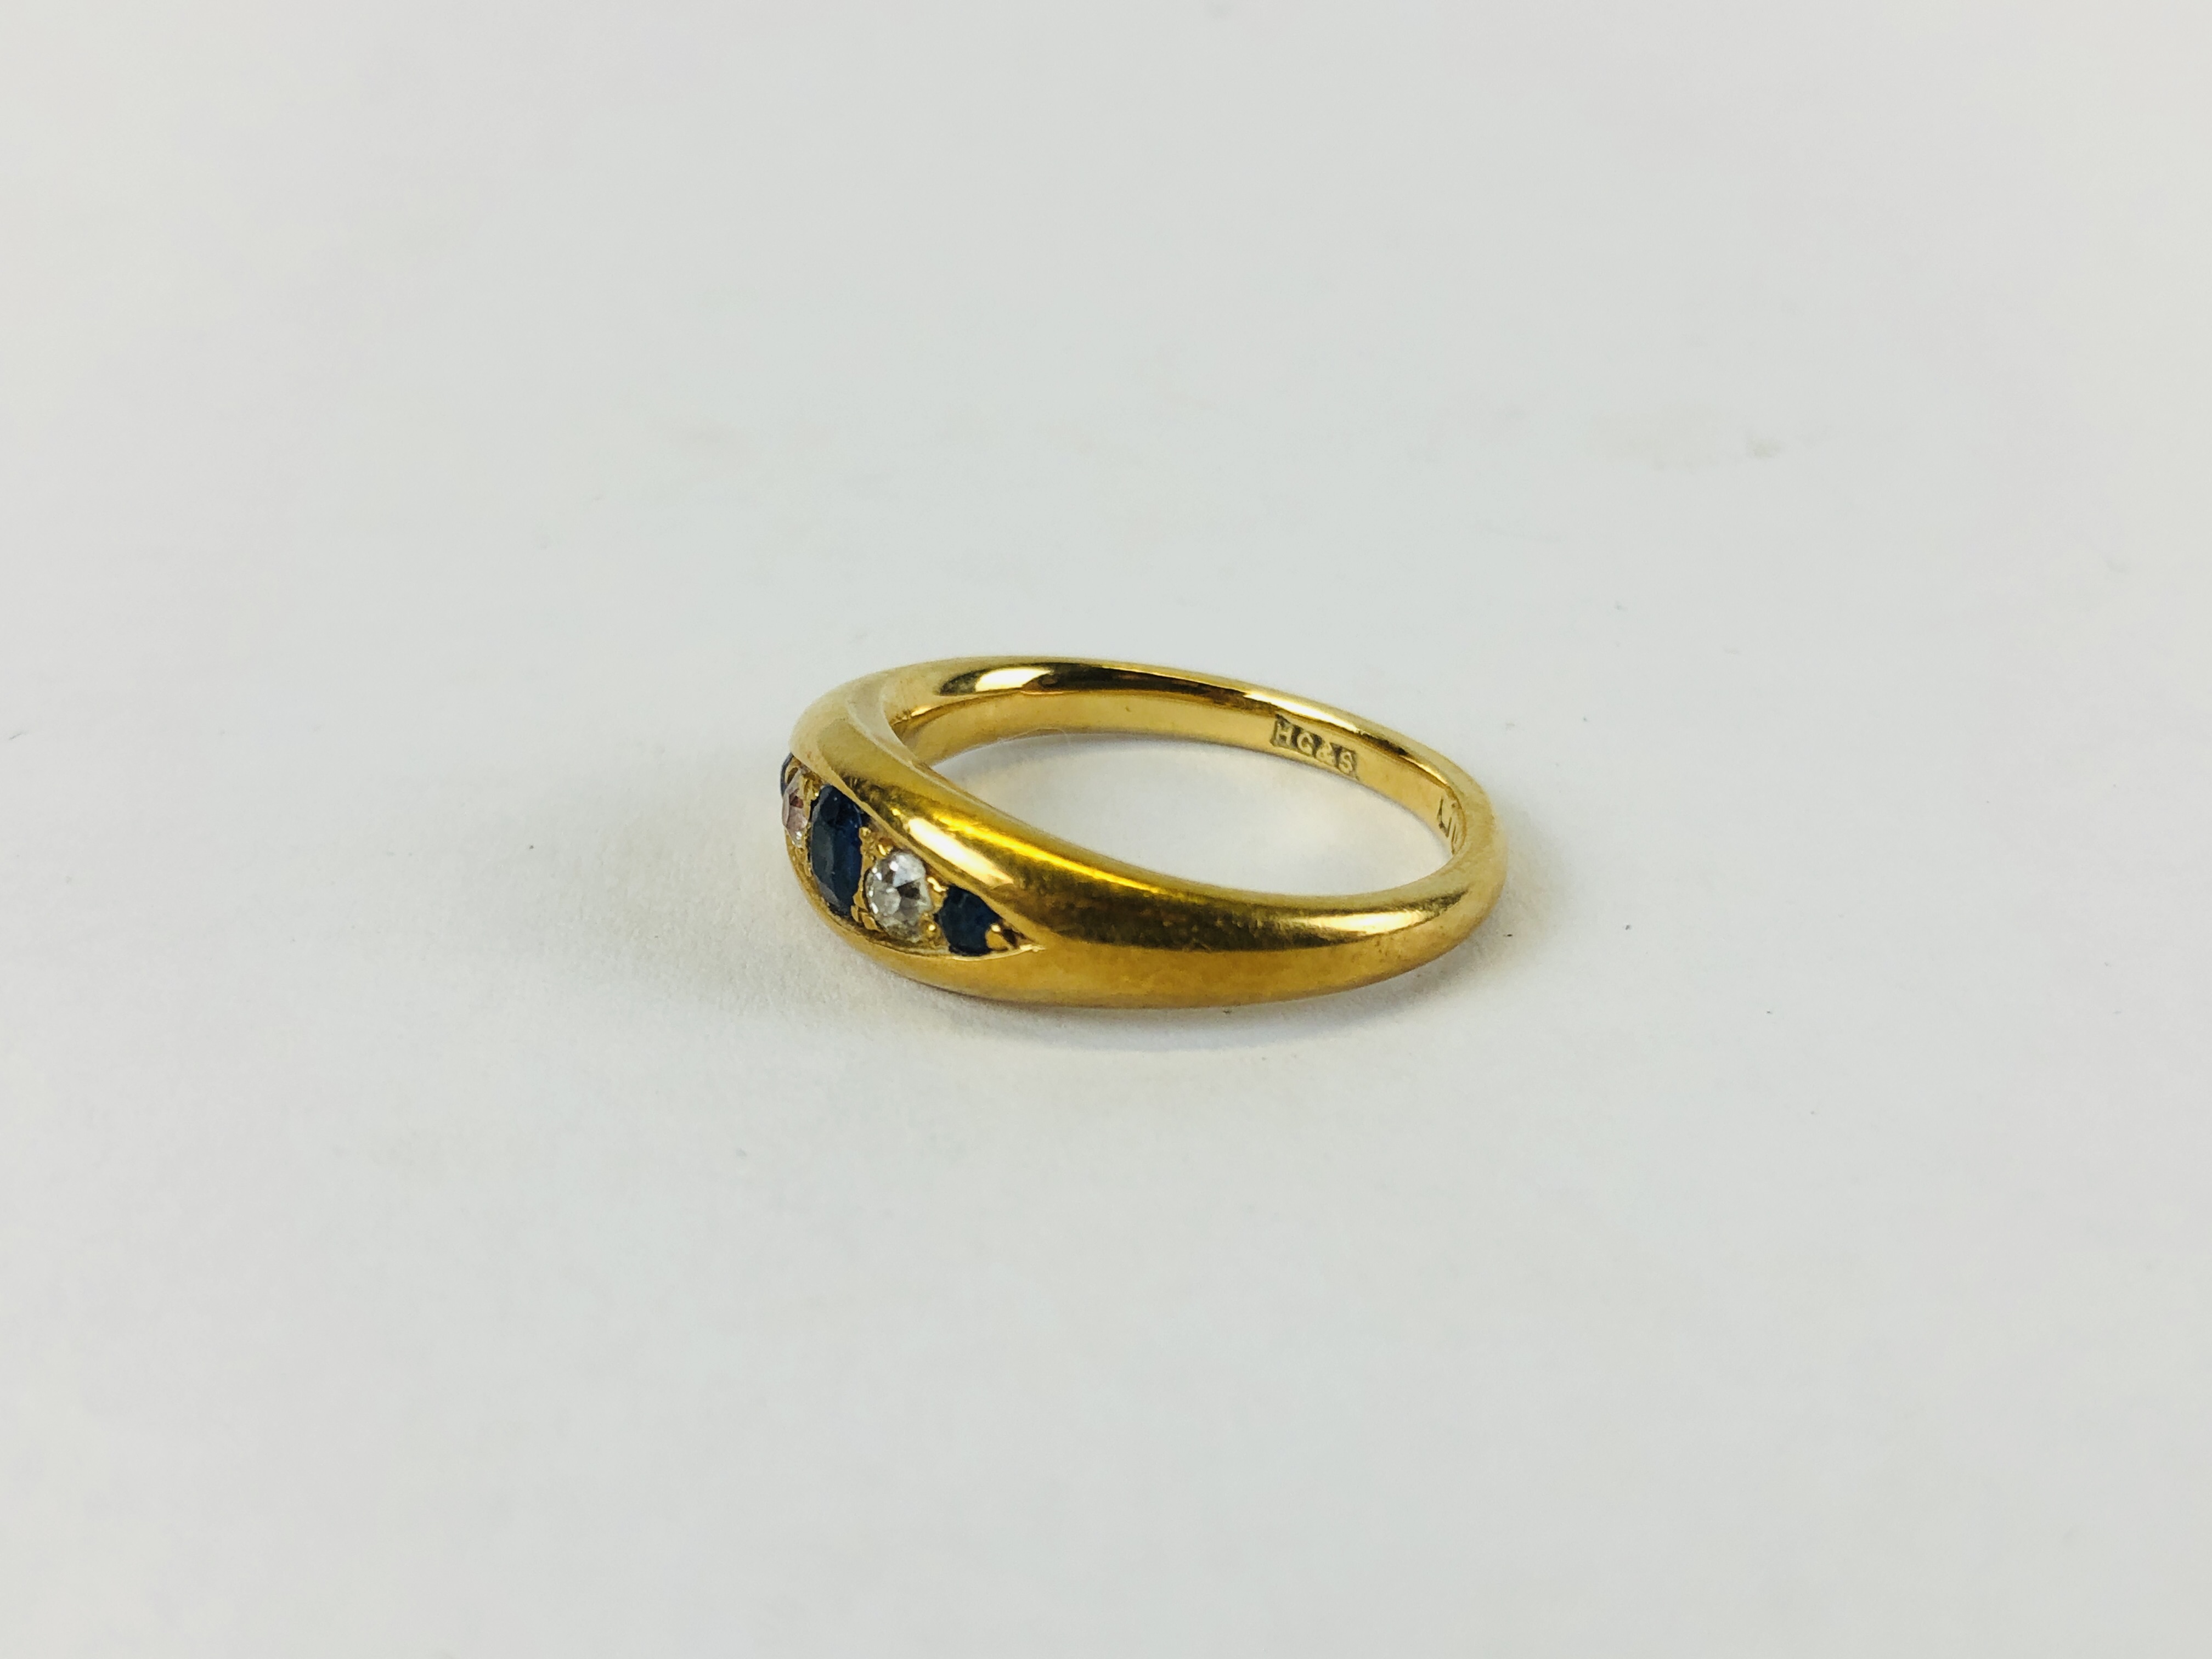 AN ANTIQUE 18CT GOLD DIAMOND AND SAPPHIRE GYPSY RING. - Image 4 of 12